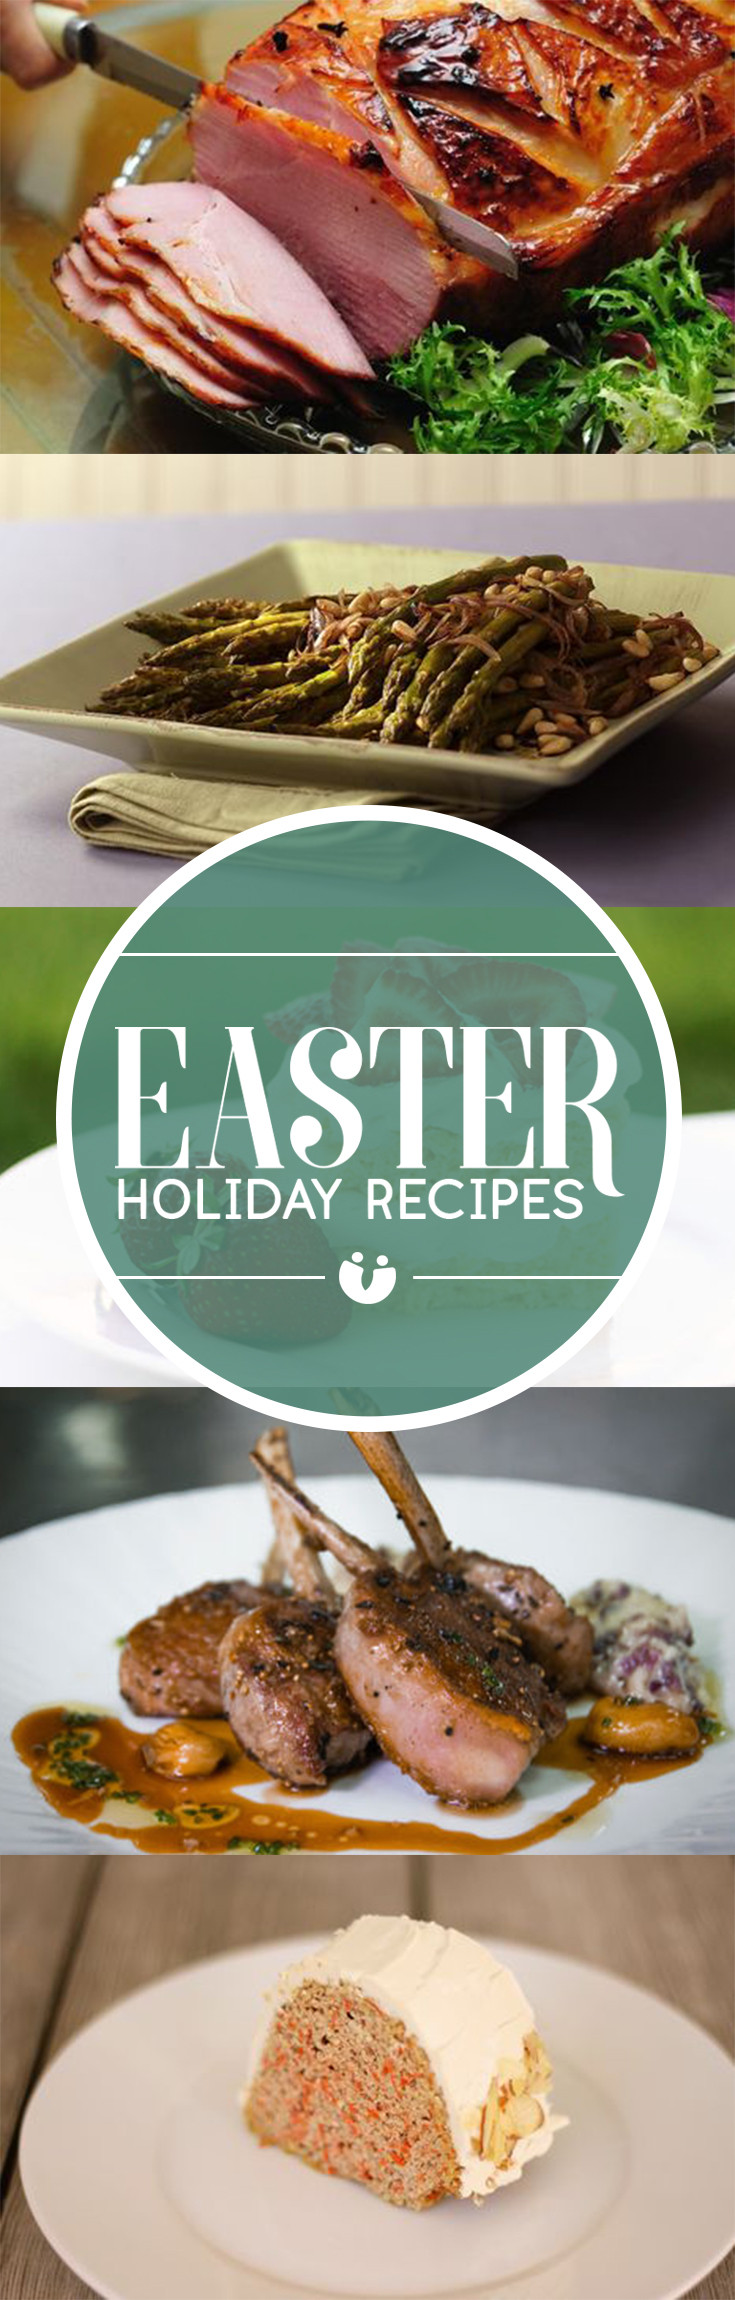 Diabetic Easter Recipes
 Easter is here and with it es Easter egg hunts church